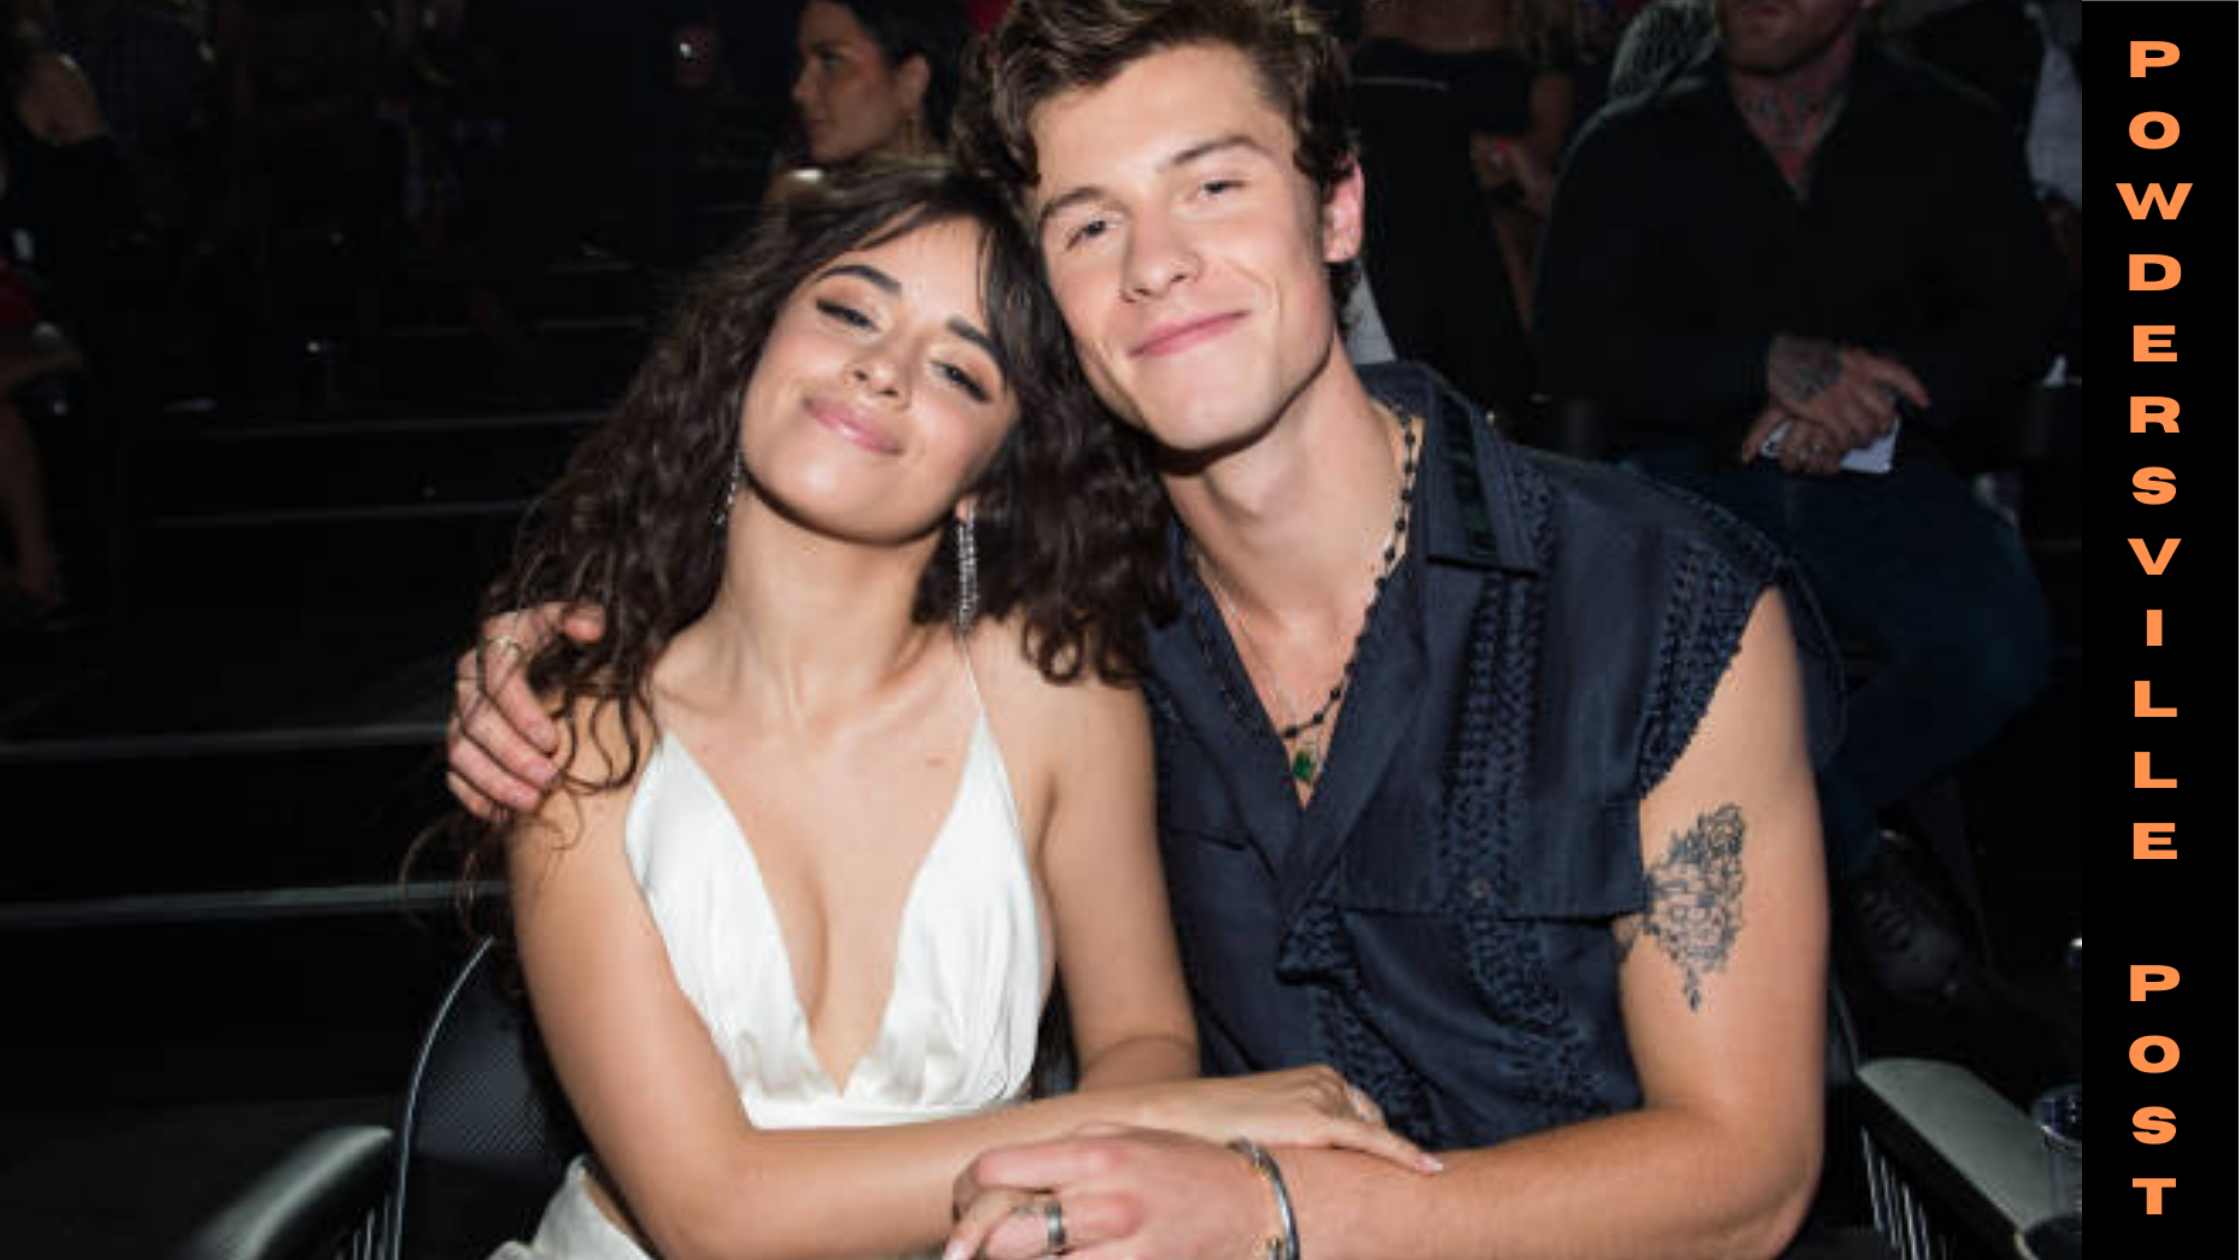 Camila Cabello Finally Decided To Open Up Her Breakup With Shawn Mendes, Fans Are Shocked To Hear About Celebrated Couples